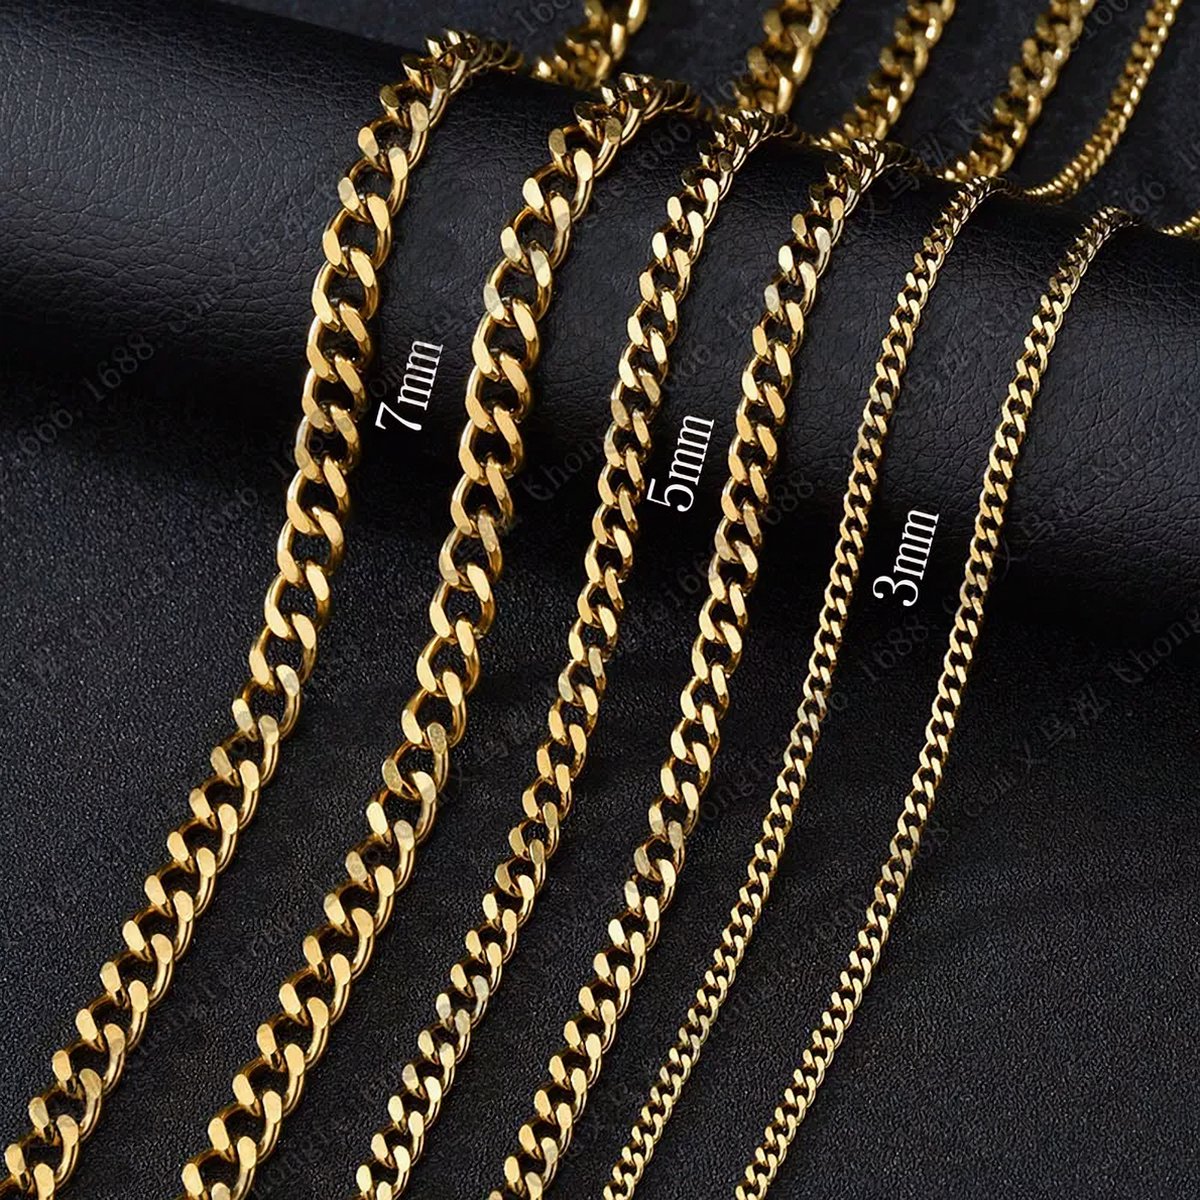 ICYBOY 18K Curb Cuban Basis Ketting [BLACK GOLD PLATED] [60 cm] [3 mm] Link Chain Chokers Basic Punk Stainless Steel Necklace Vintage Black Gold Tone Solid Metal